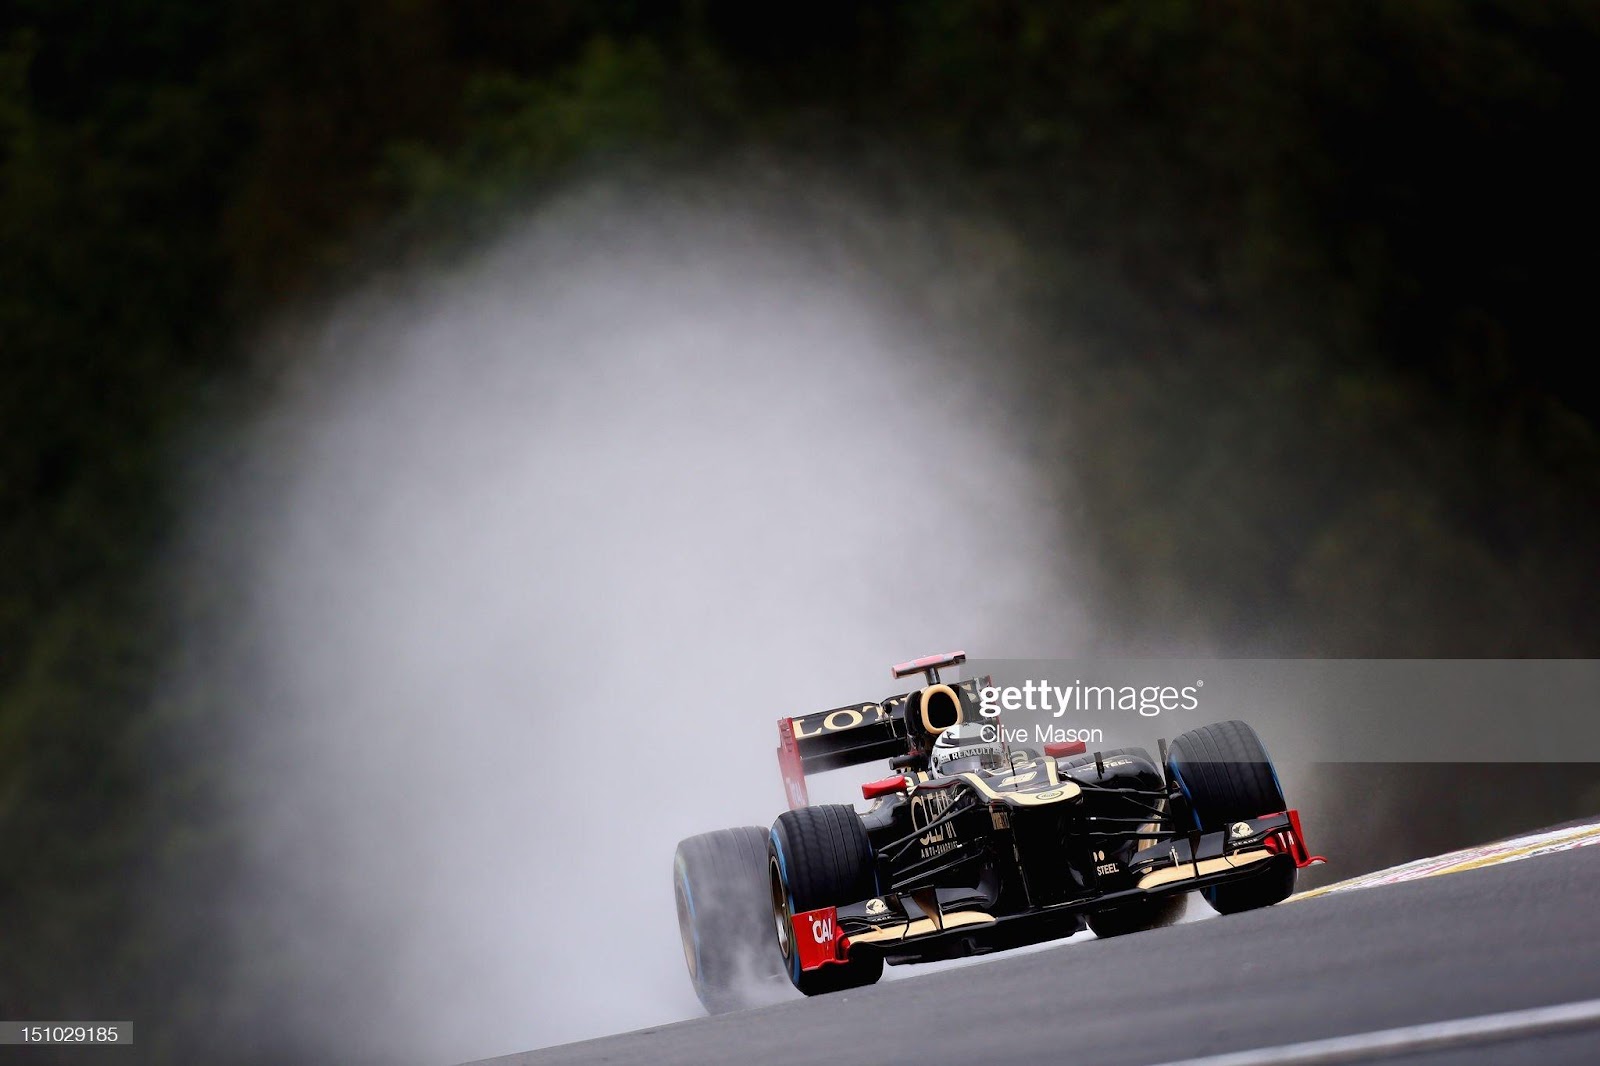 Kimi Raikkonen, Lotus, drives during practice for the Belgian Grand Prix at the Circuit of Spa Francorchamps on August 31, 2012.